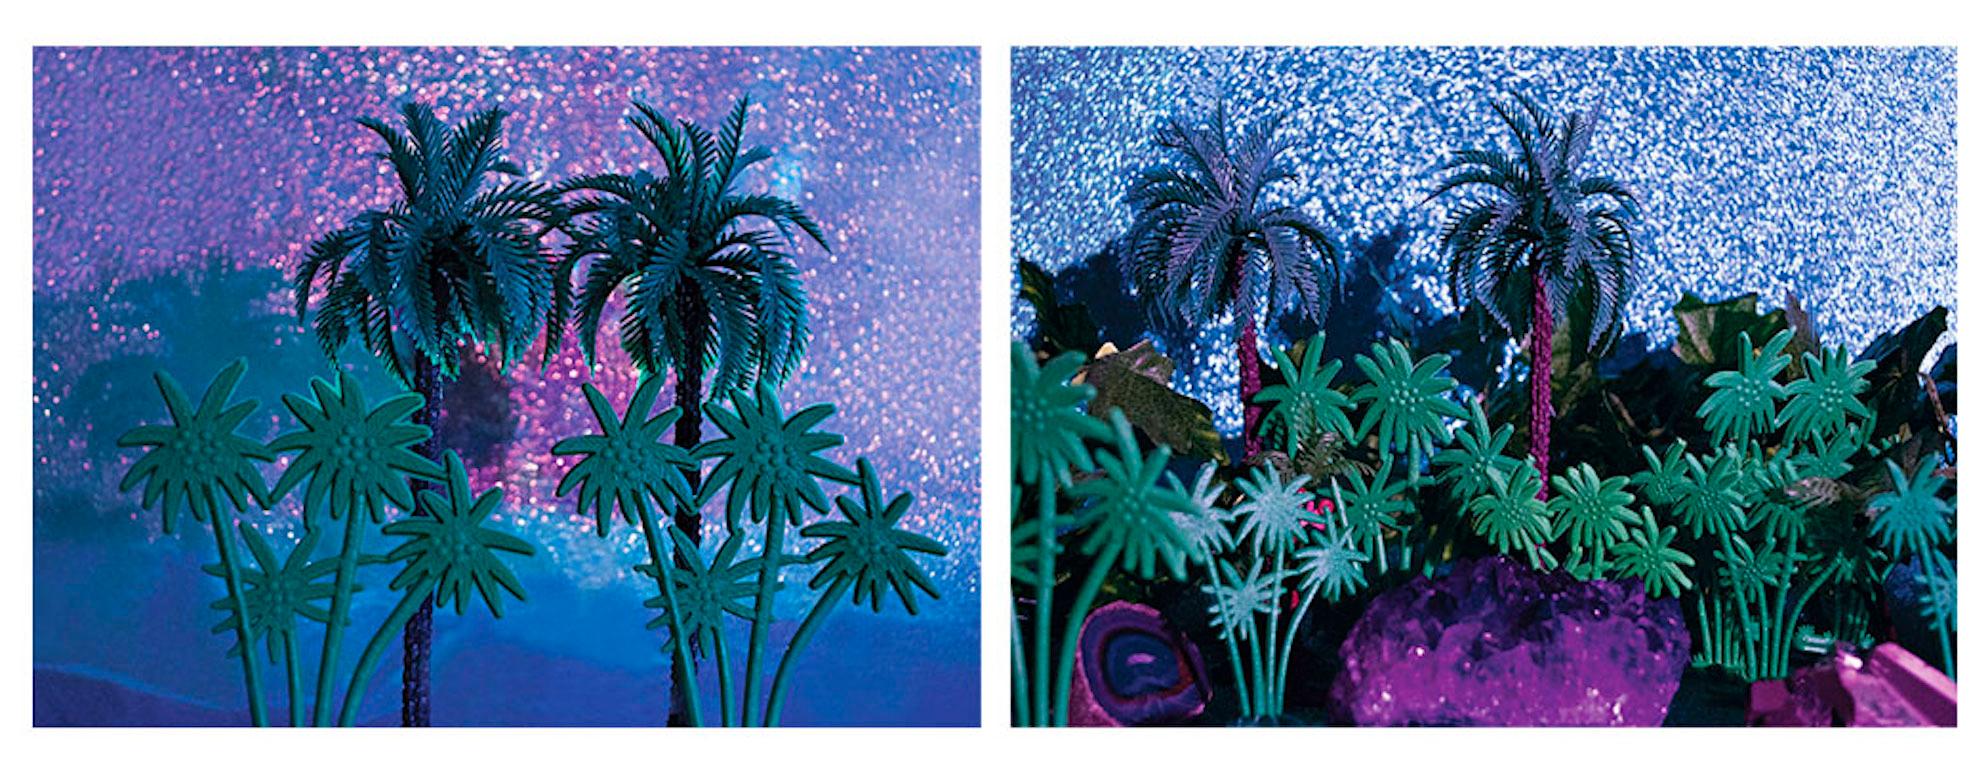 Tropicarios Installation from the series Tropicarios by Paloma Castello
Digital photography print on chroma luxe.
7